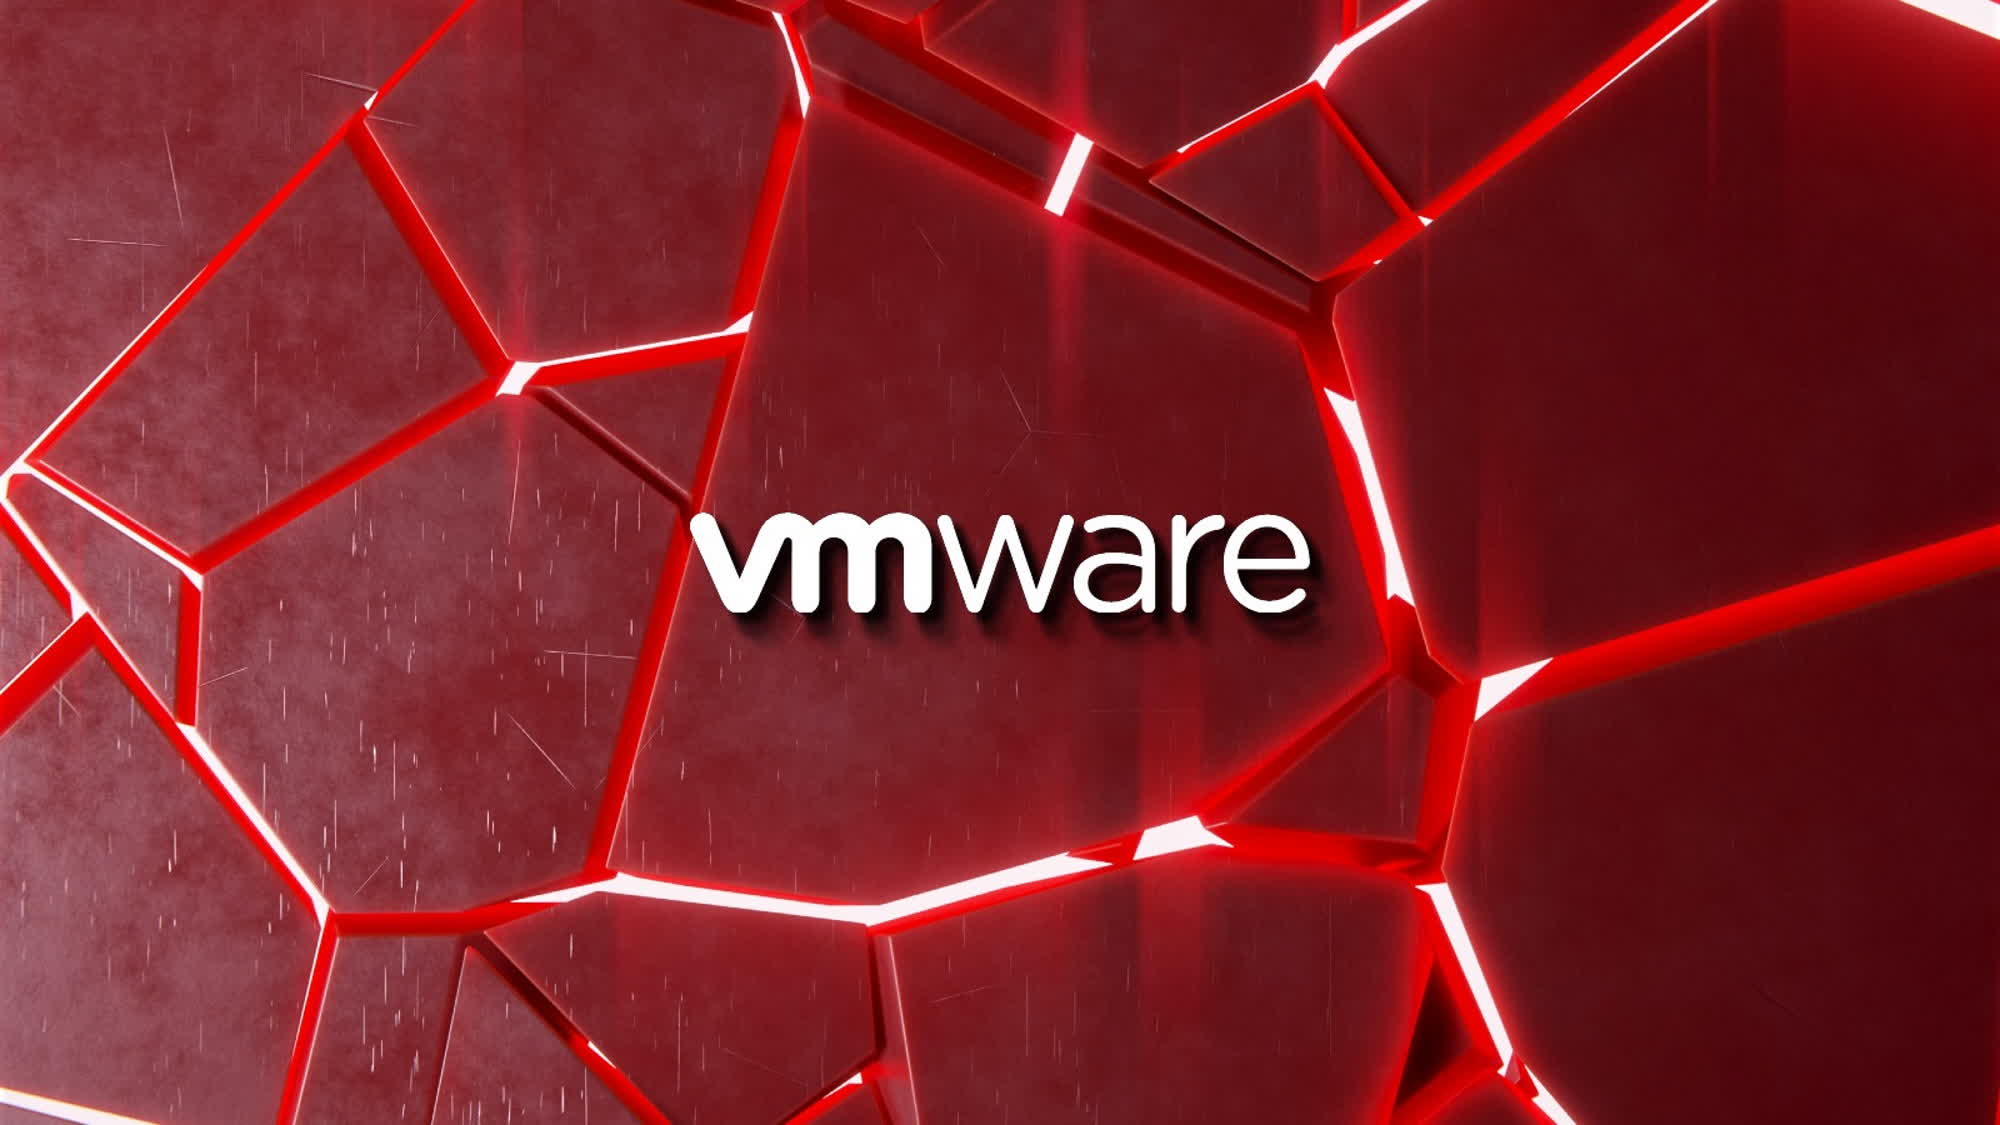 VMware forced to patch dangerous vulnerabilities in discontinued products – The TechLead